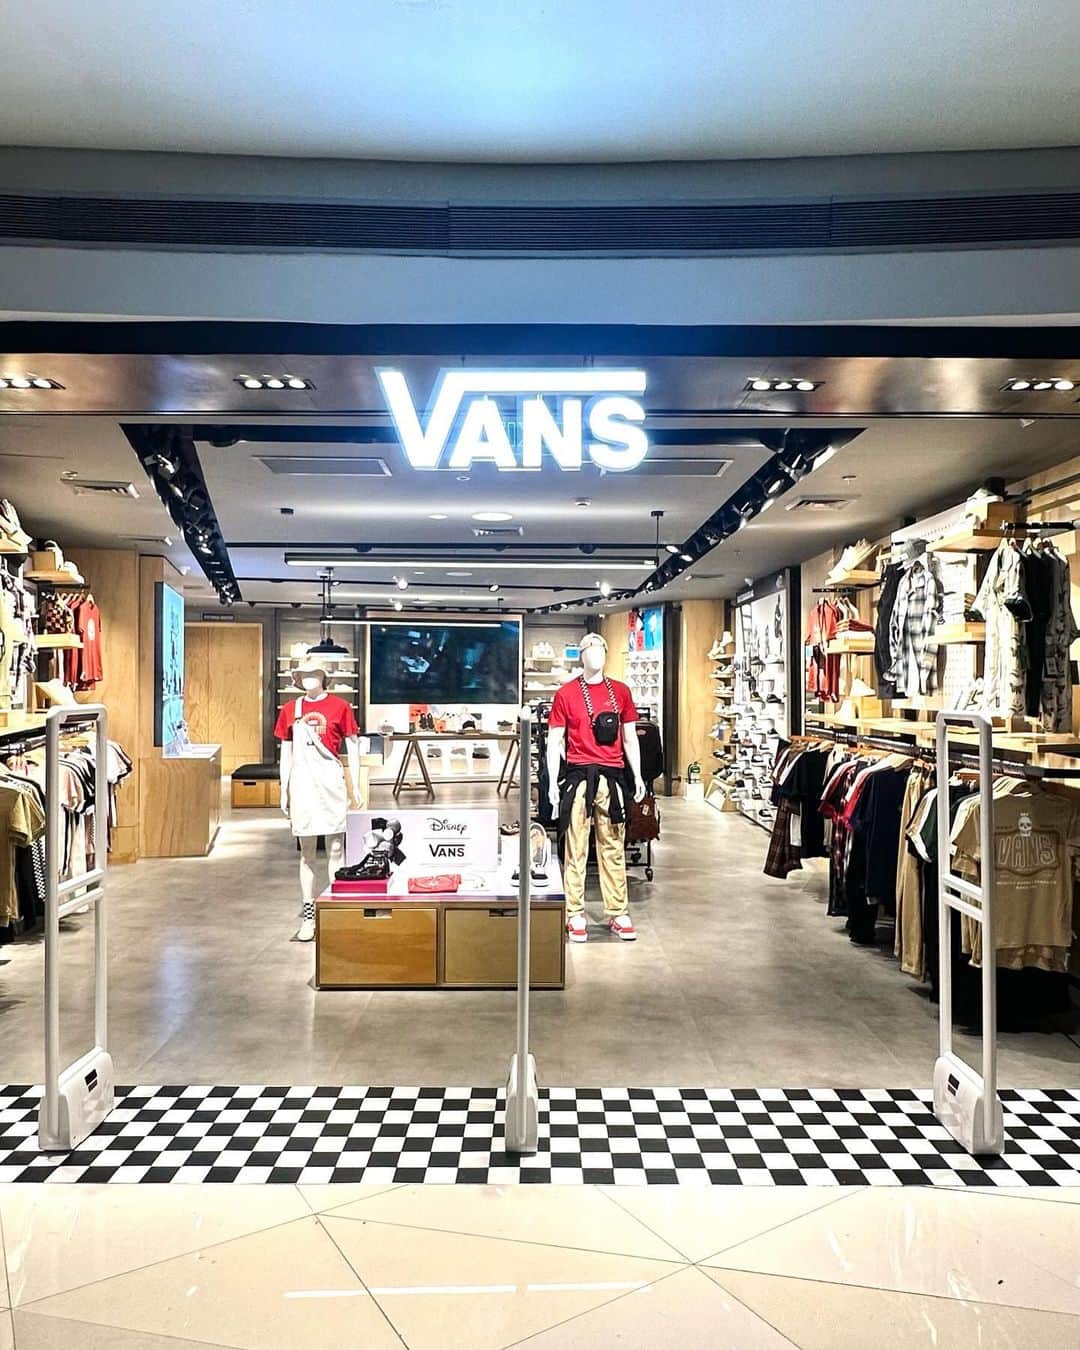 Vans Philippinesのインスタグラム：「𝐏𝐞𝐞𝐩 𝐨𝐮𝐫 𝐟𝐫𝐞𝐬𝐡 𝐬𝐭𝐨𝐫𝐞 𝐚𝐭 𝐀𝐲𝐚𝐥𝐚 𝐌𝐚𝐥𝐥𝐬 𝐓𝐫𝐢𝐧𝐨𝐦𝐚, 𝐍𝐎𝐖 𝐎𝐏𝐄𝐍.   Our newly revamped store at Ayala Malls, Trinoma is NOW OPEN! Get those boards rolling and visit us at Level 1. An exclusive FREE KNITTED WOVEN BAG awaits the first 100 customers with a minimum single-receipt purchase of P8,000.   Look forward to seeing you, fam!  #vansphilippines」